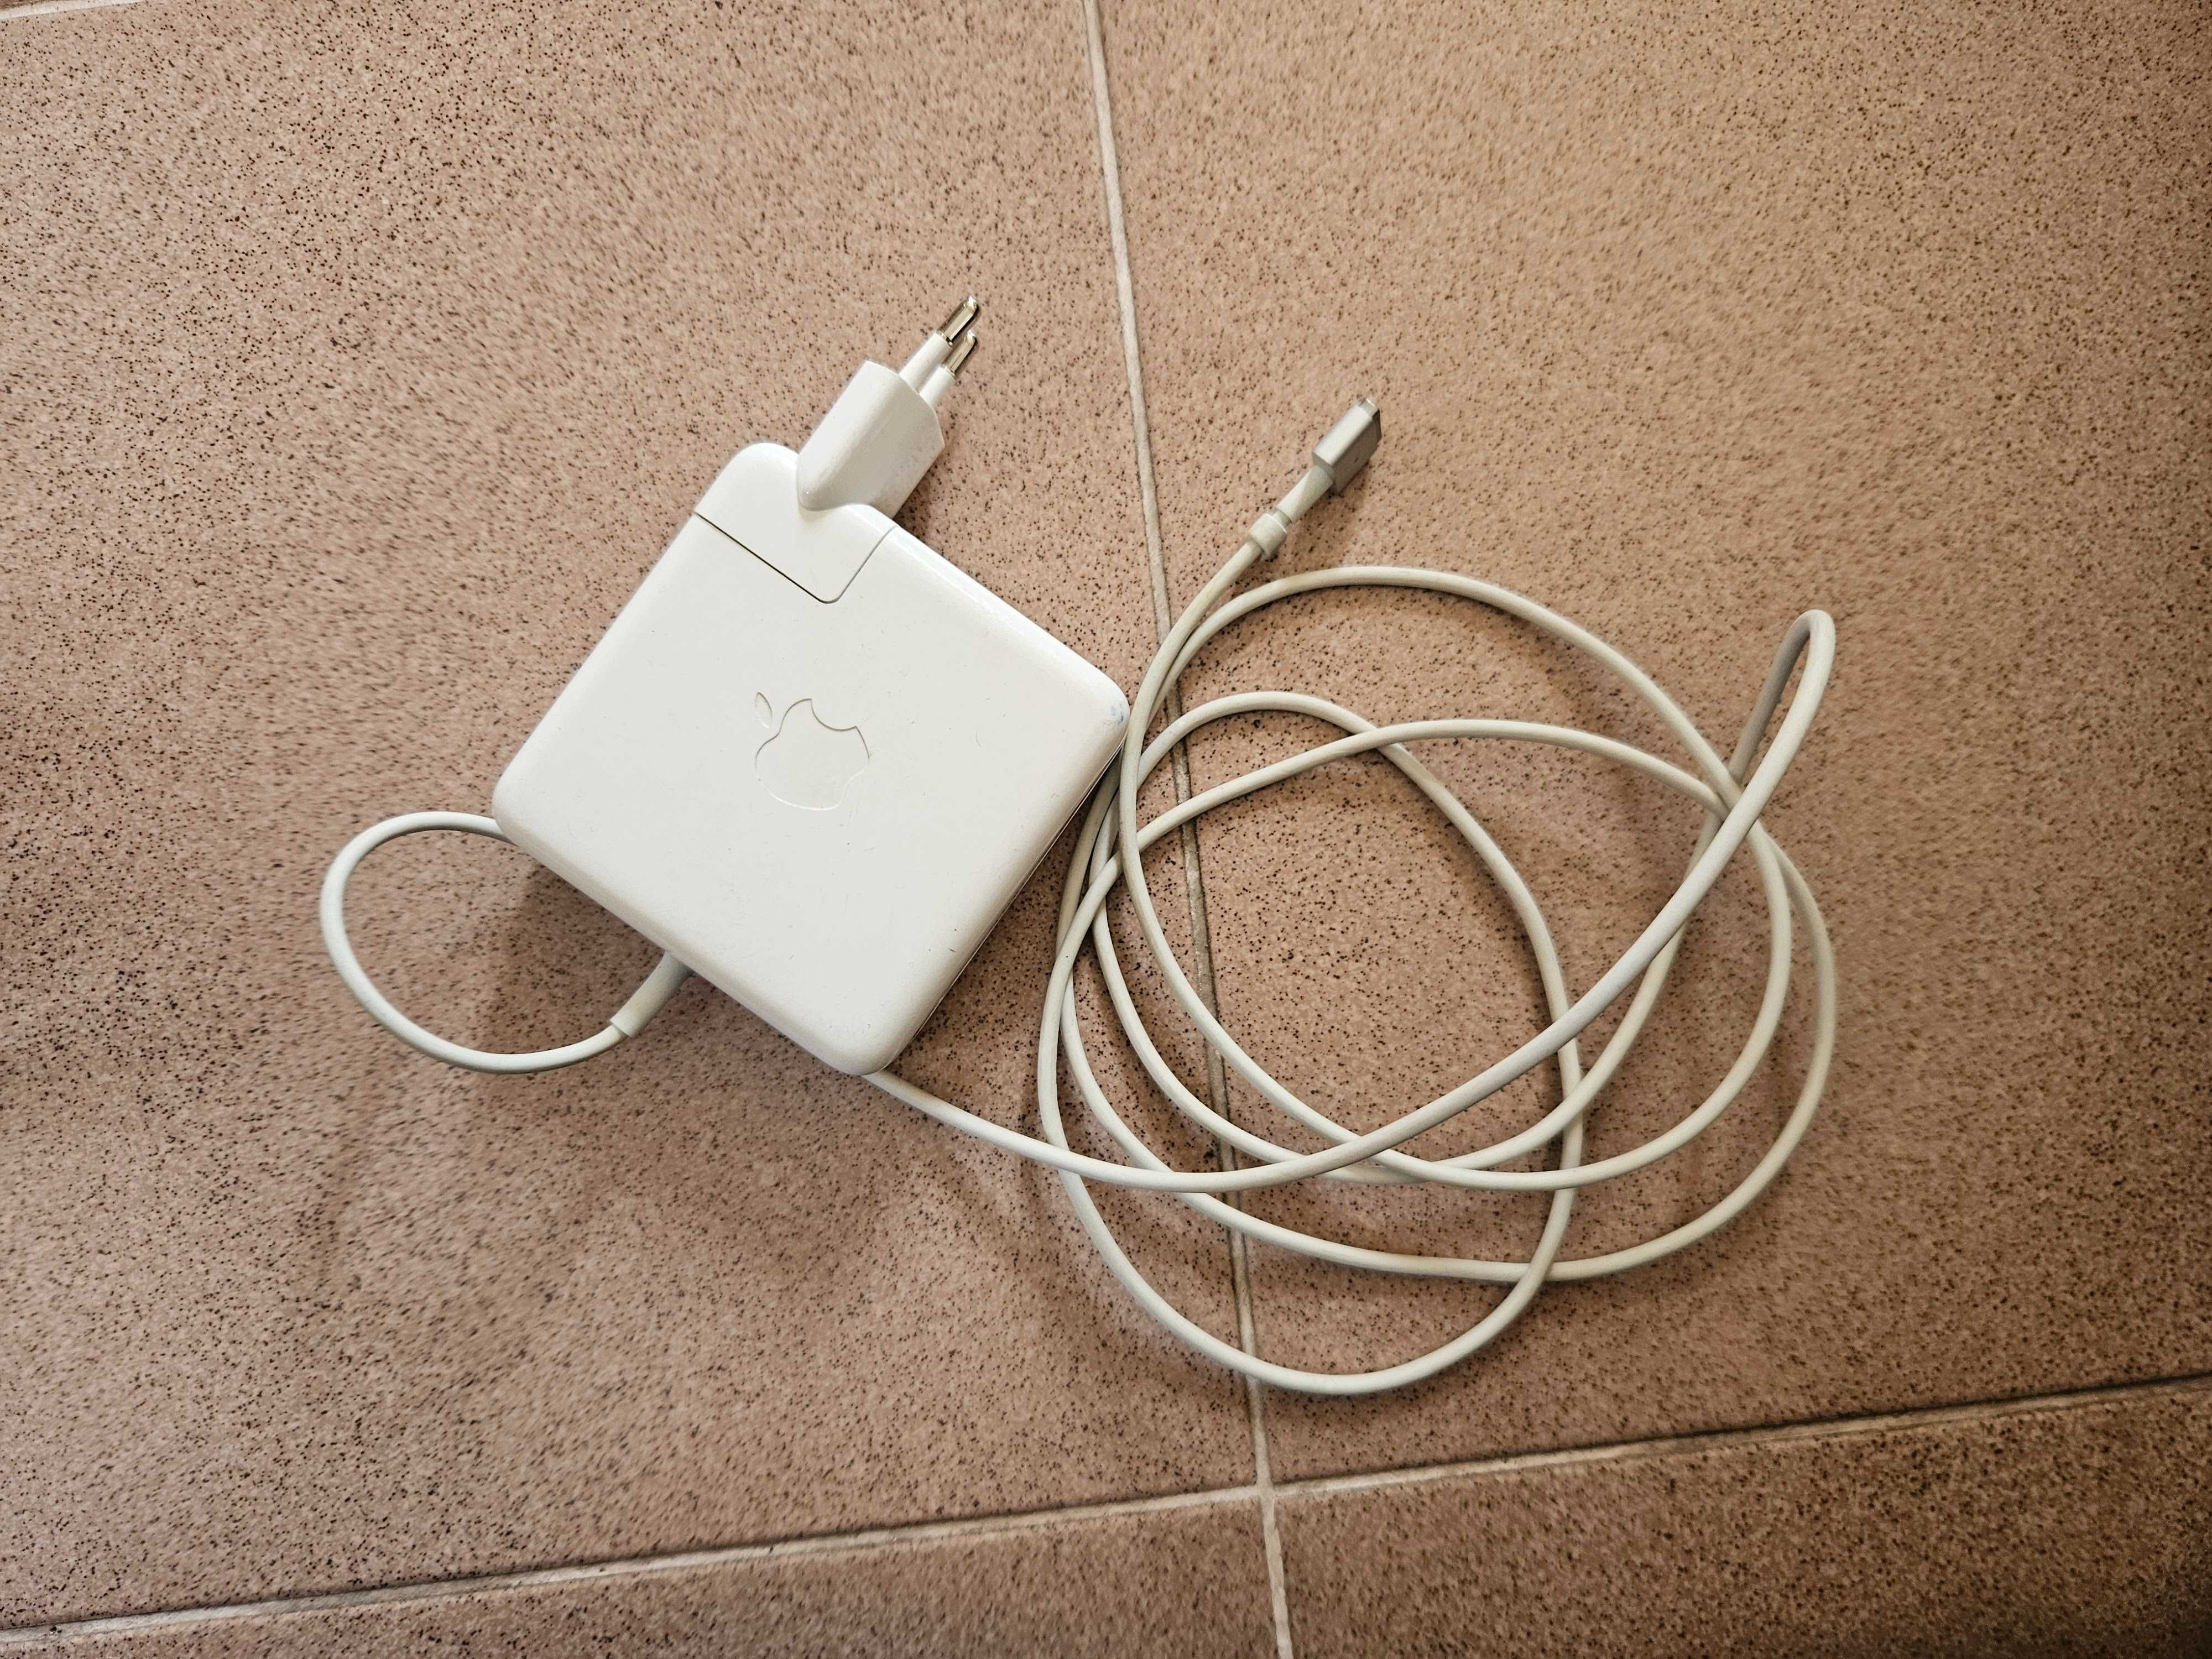 MagSafe 2 Power Adapter 85W Model A1424